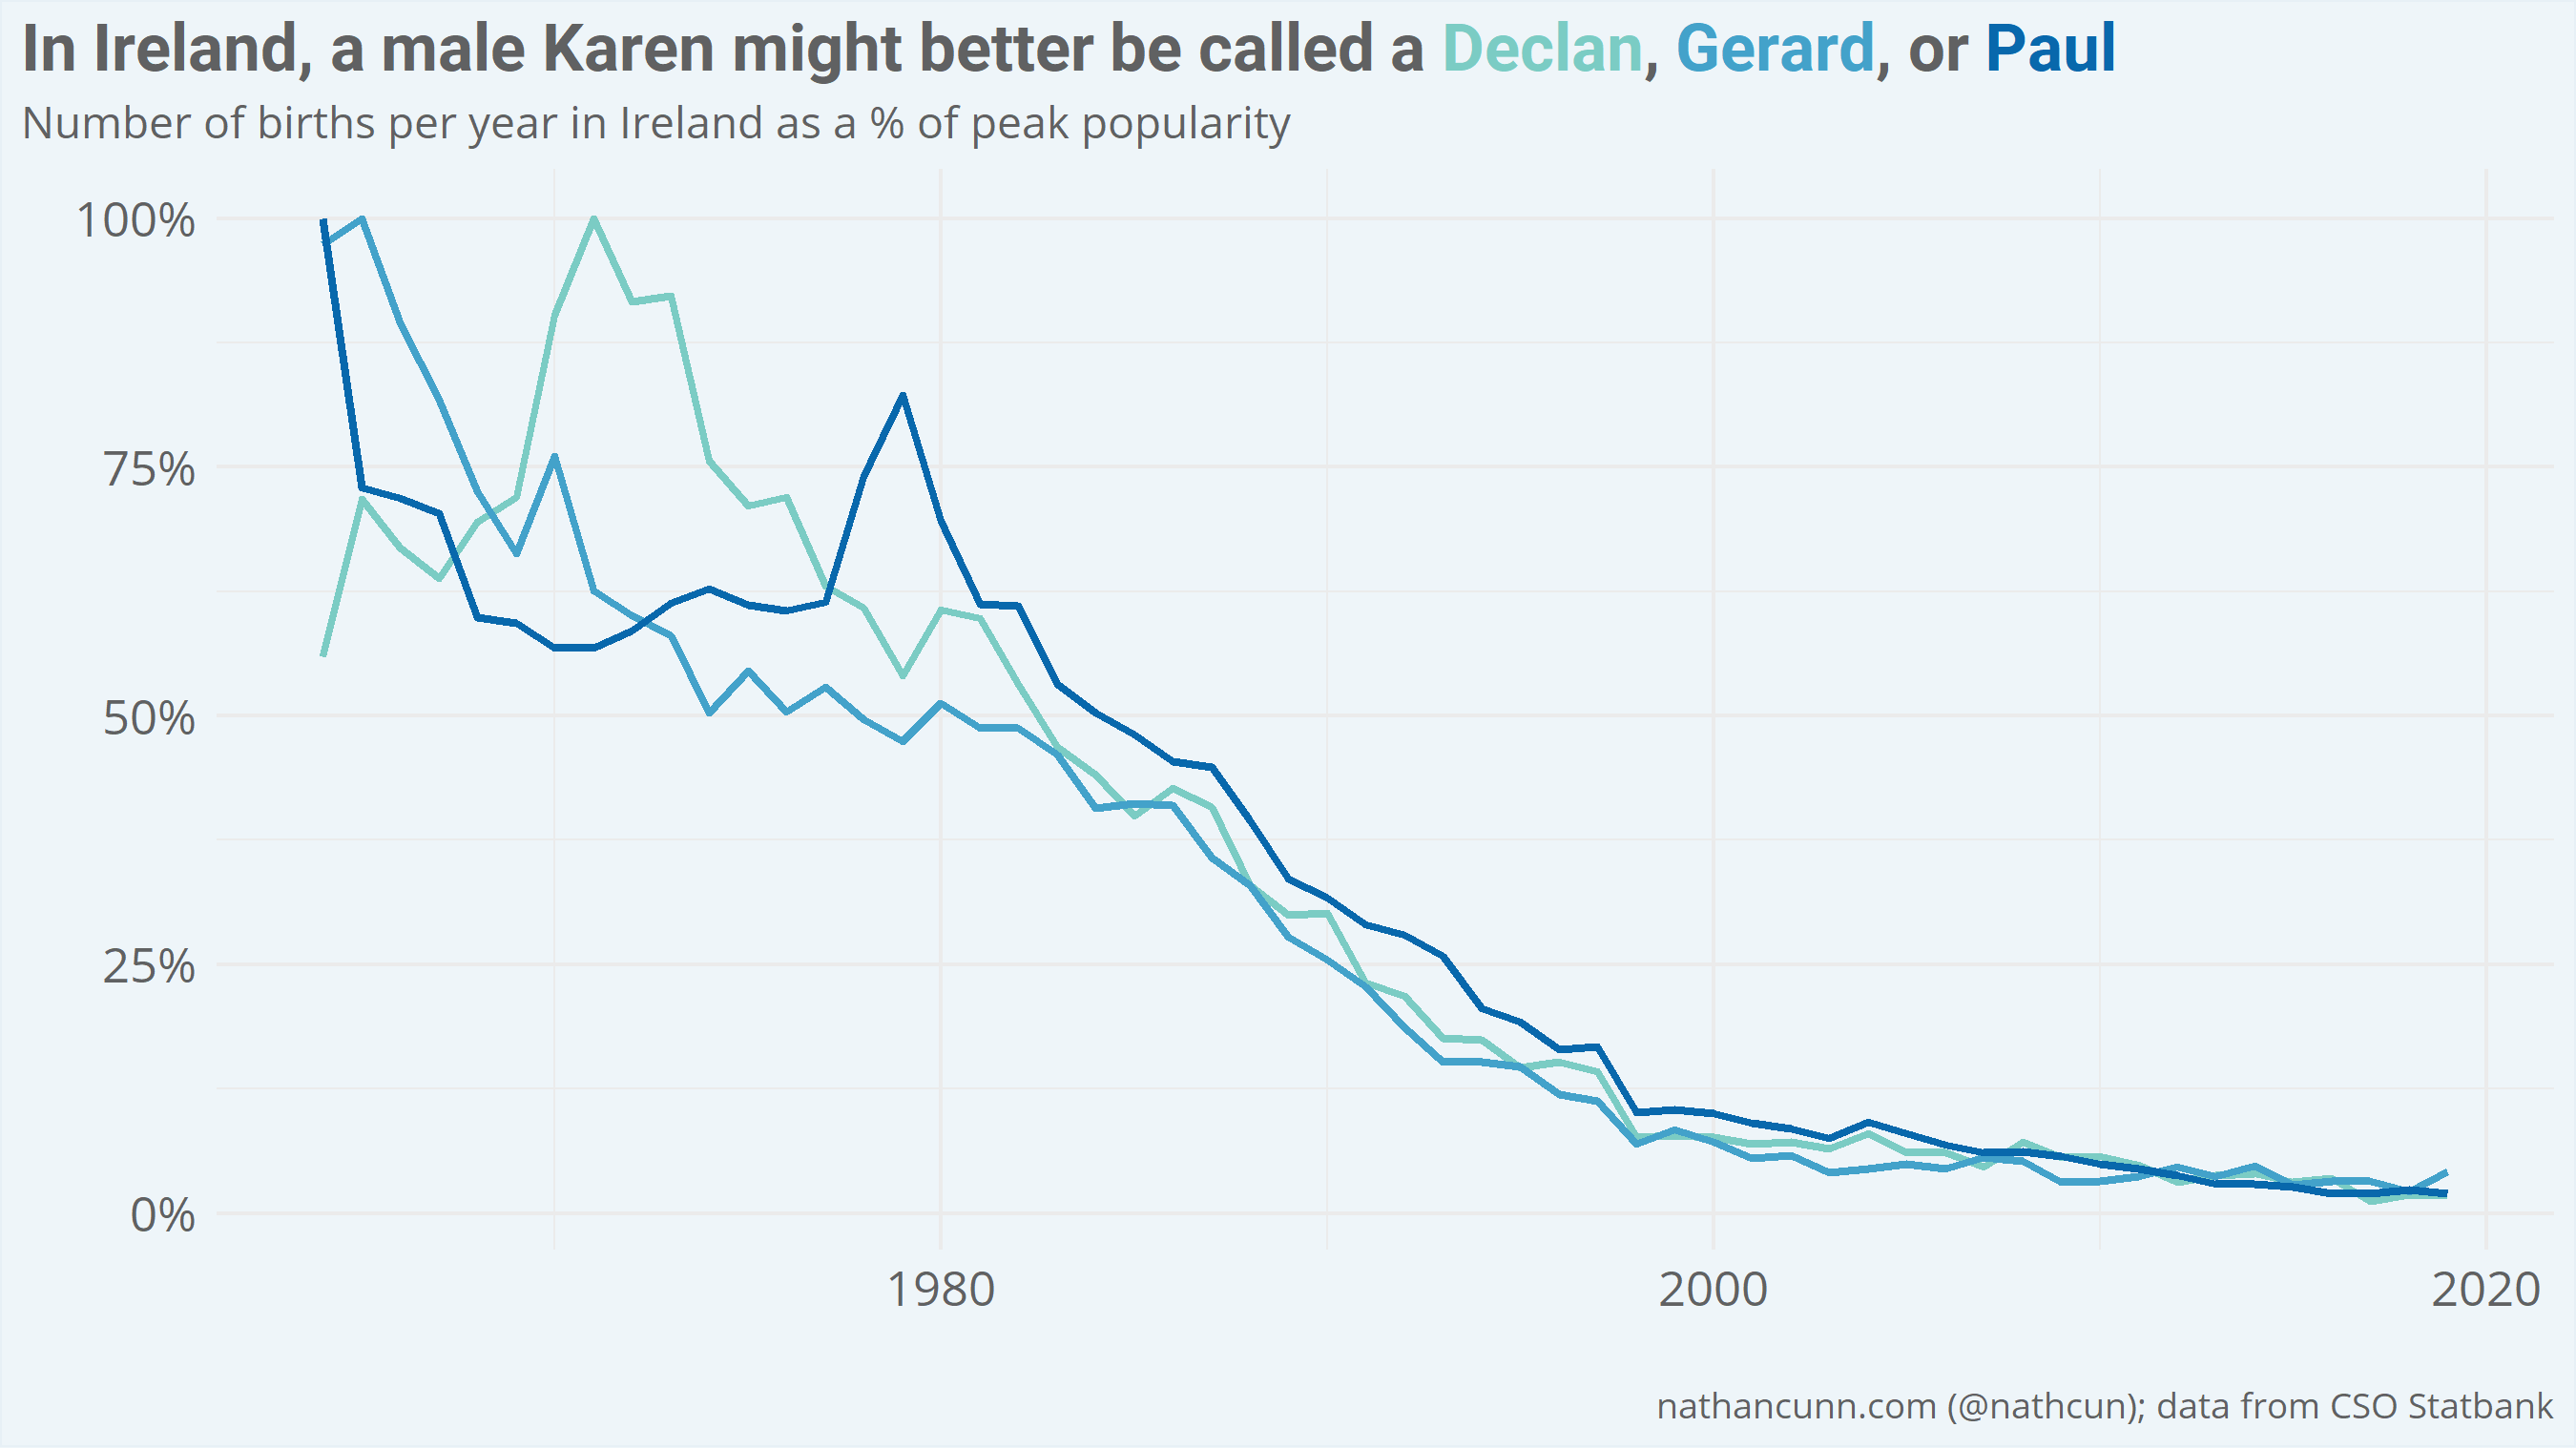 Line chart showing number of Declans, Pauls, and Gerards born per year in Ireland, with a peak occurring in the early 1960s, and slow decline for all three names since.